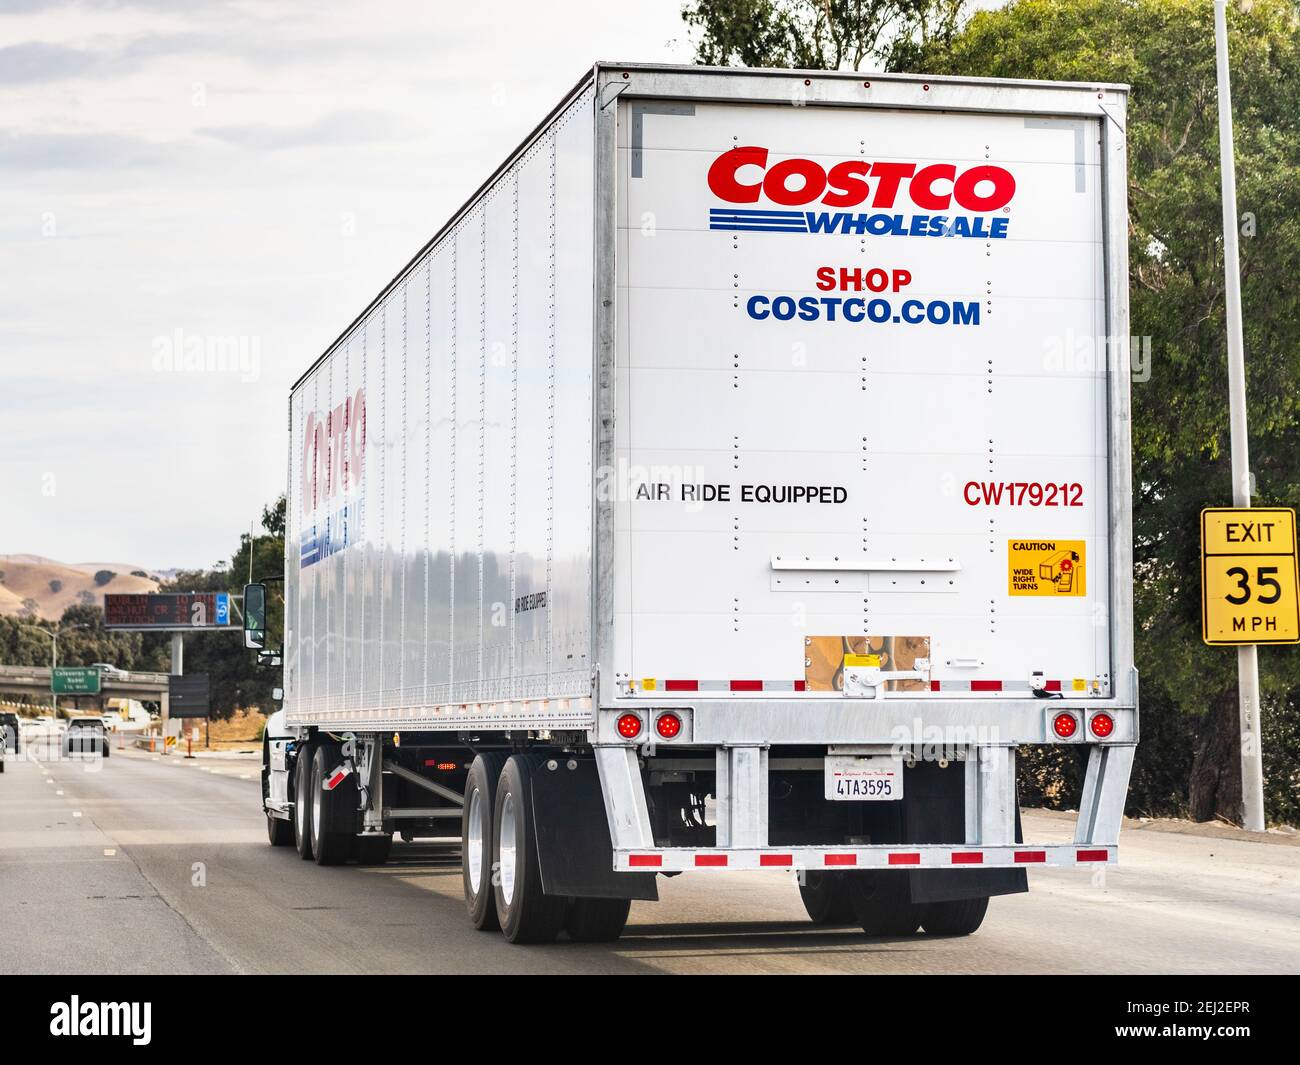 Oct 10, 2020 Fremont / CA / USA - Costco Wholesale truck driving on the freeway in East San Francisco Bay Area Stock Photo